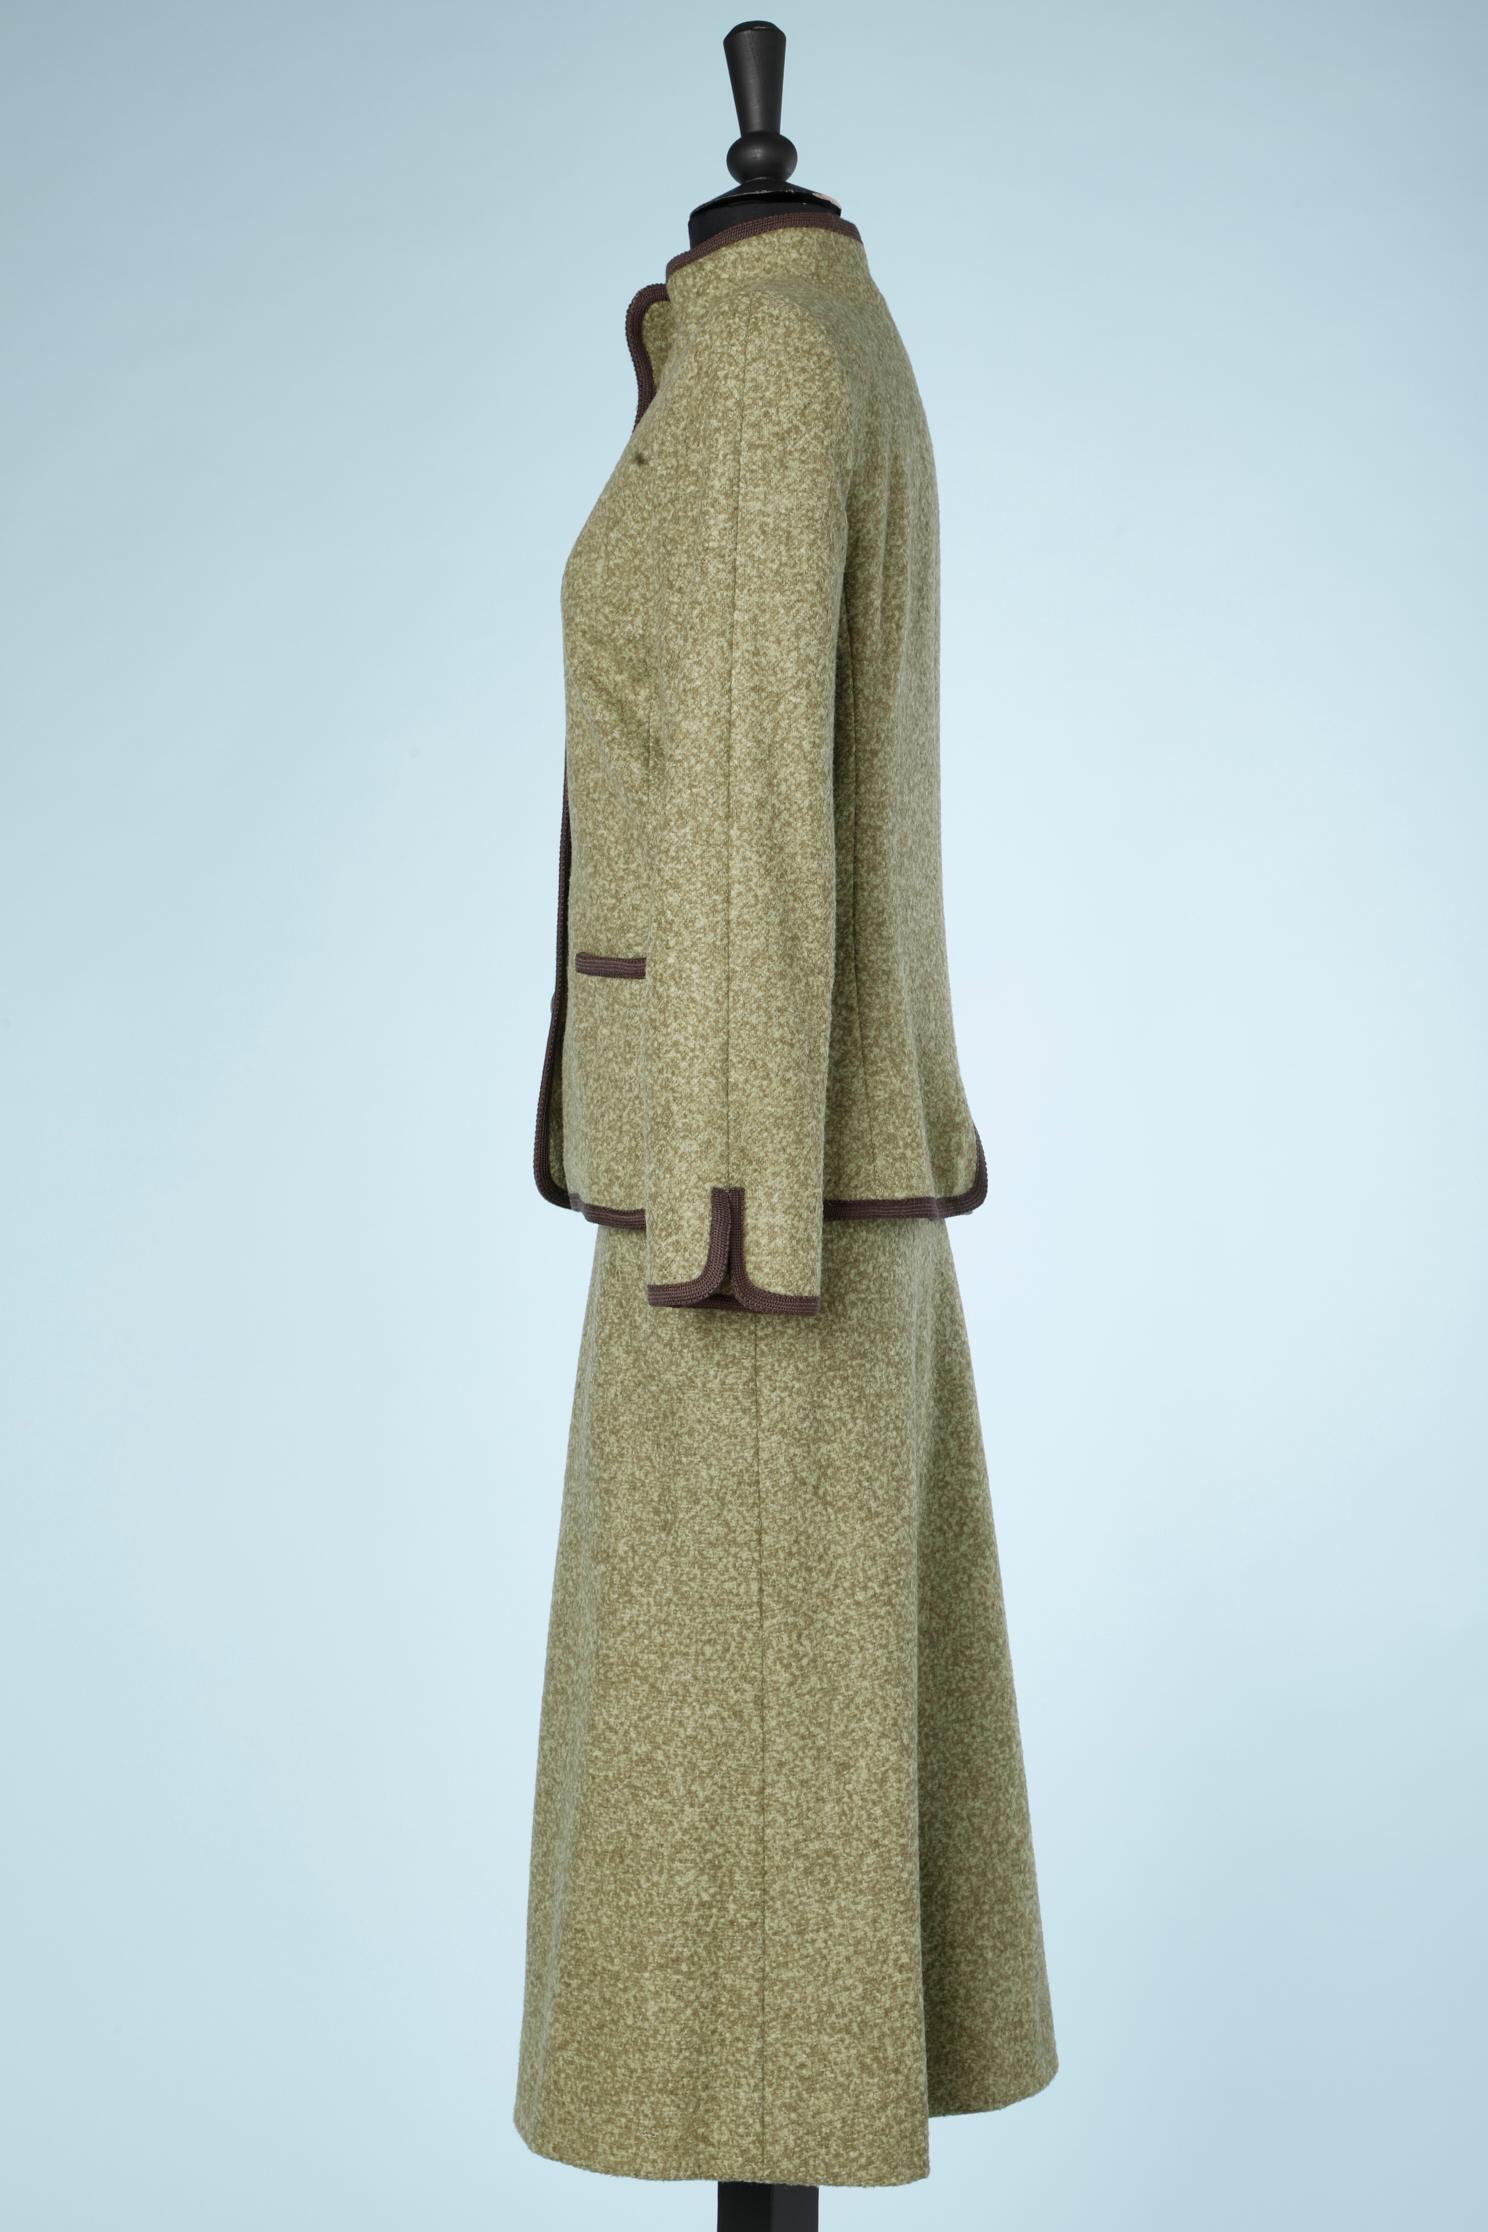 Green wool skirt-suit with brown braids piping Ivoire de Balmain Circa 1980's  For Sale 1